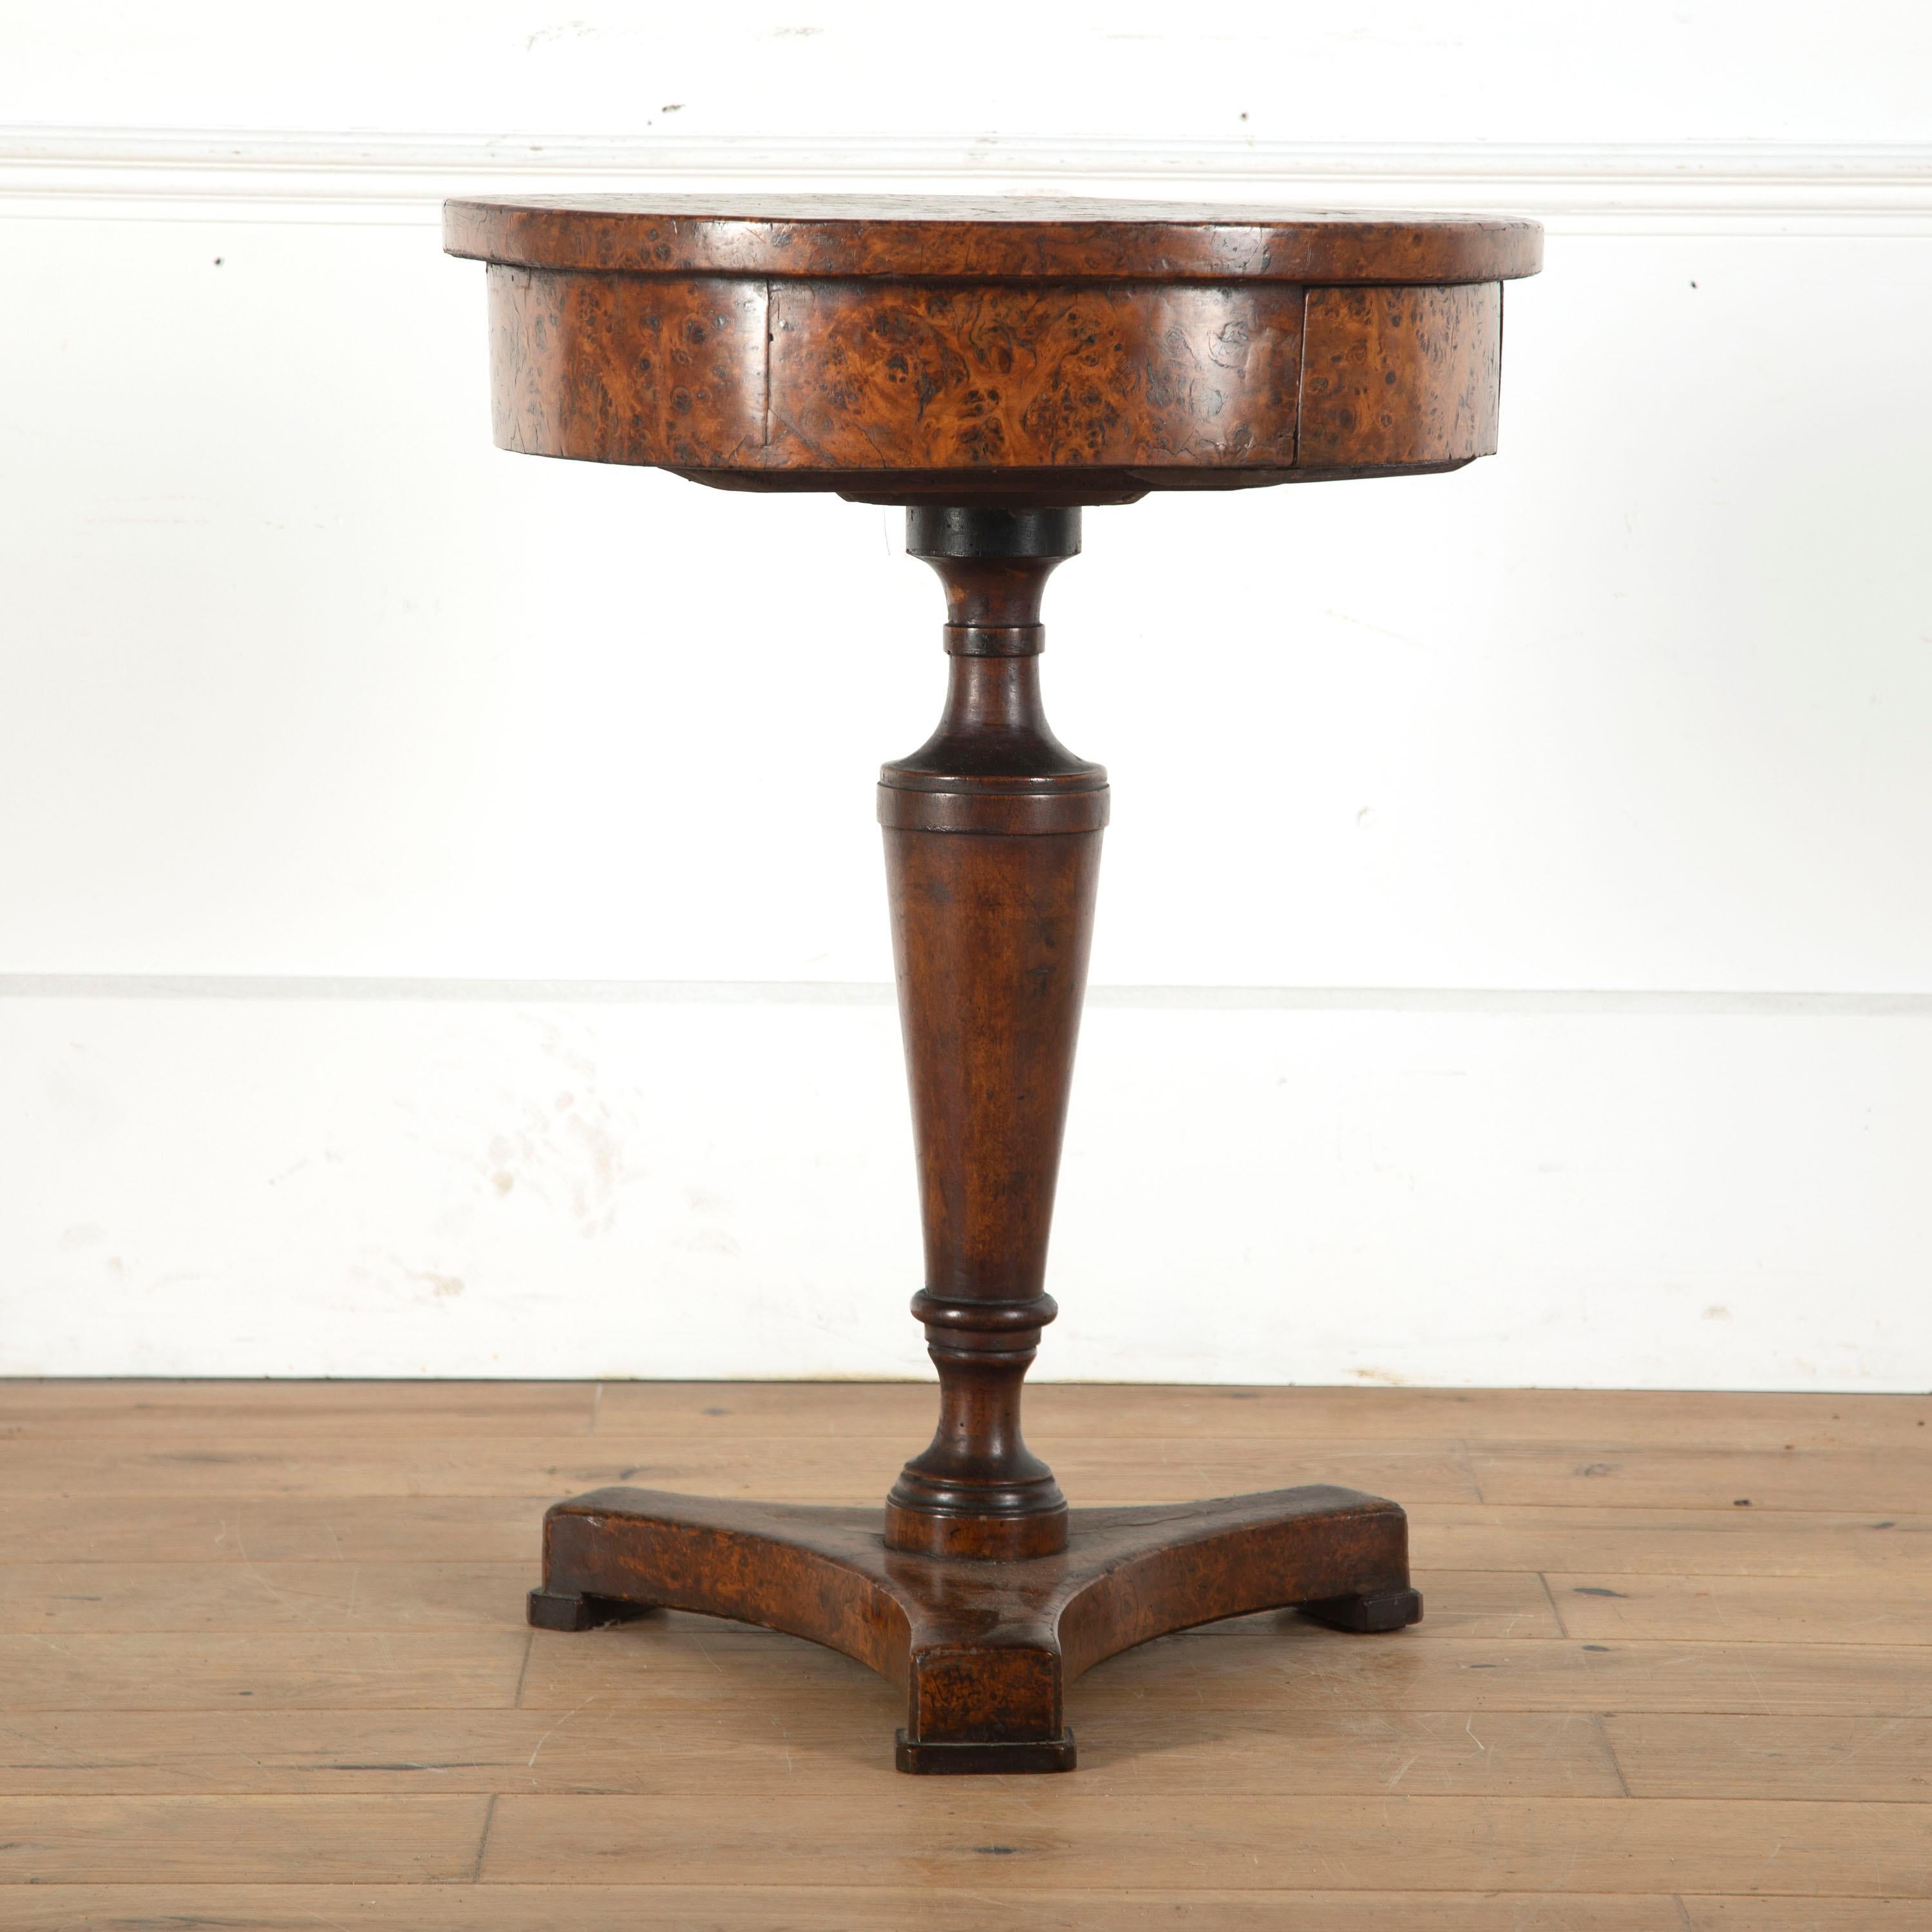 Rare Italian burr oak occasional table, circa 1820.

Featuring a single drawer to the frieze, this table is supported by a vase pedestal on a triform base.